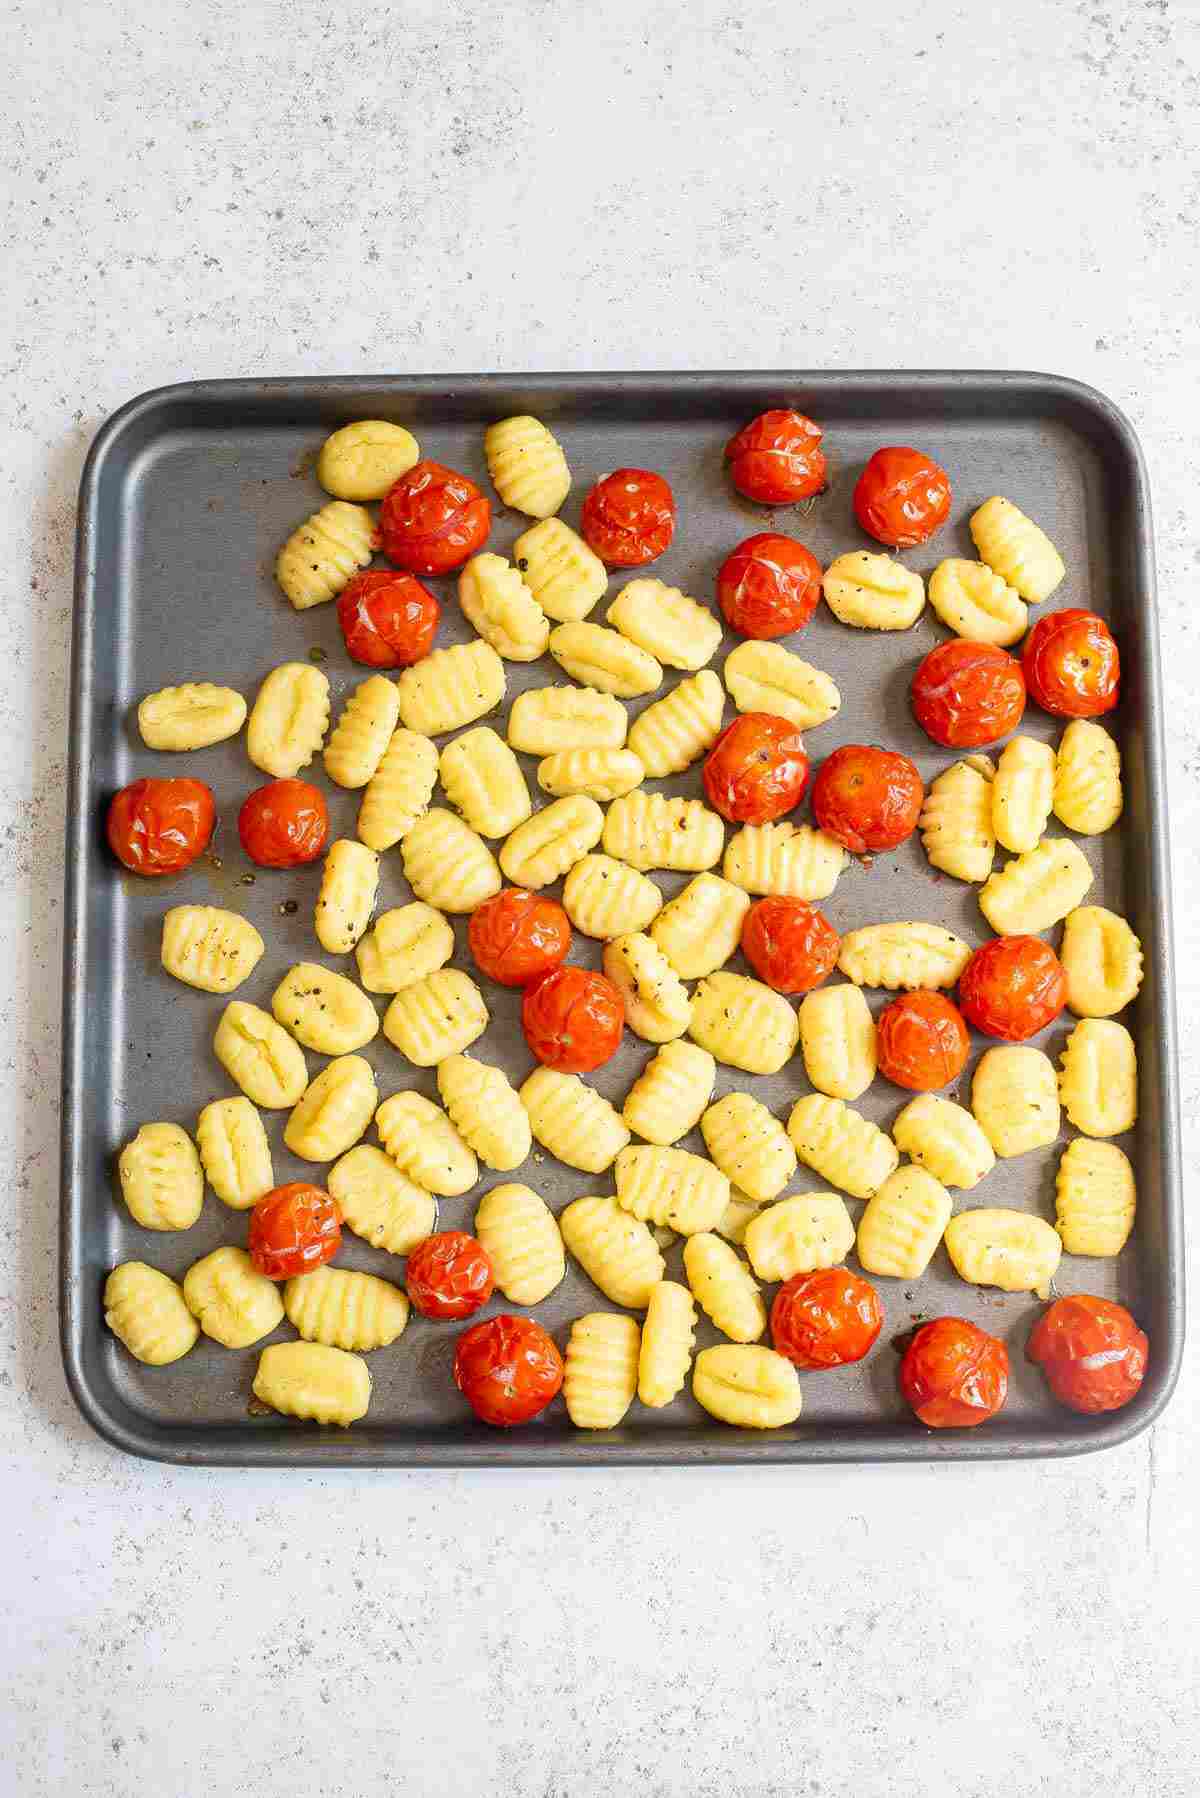 A sheet pan with gnocchi and cherry tomatoes, seasoned and ready for baking.